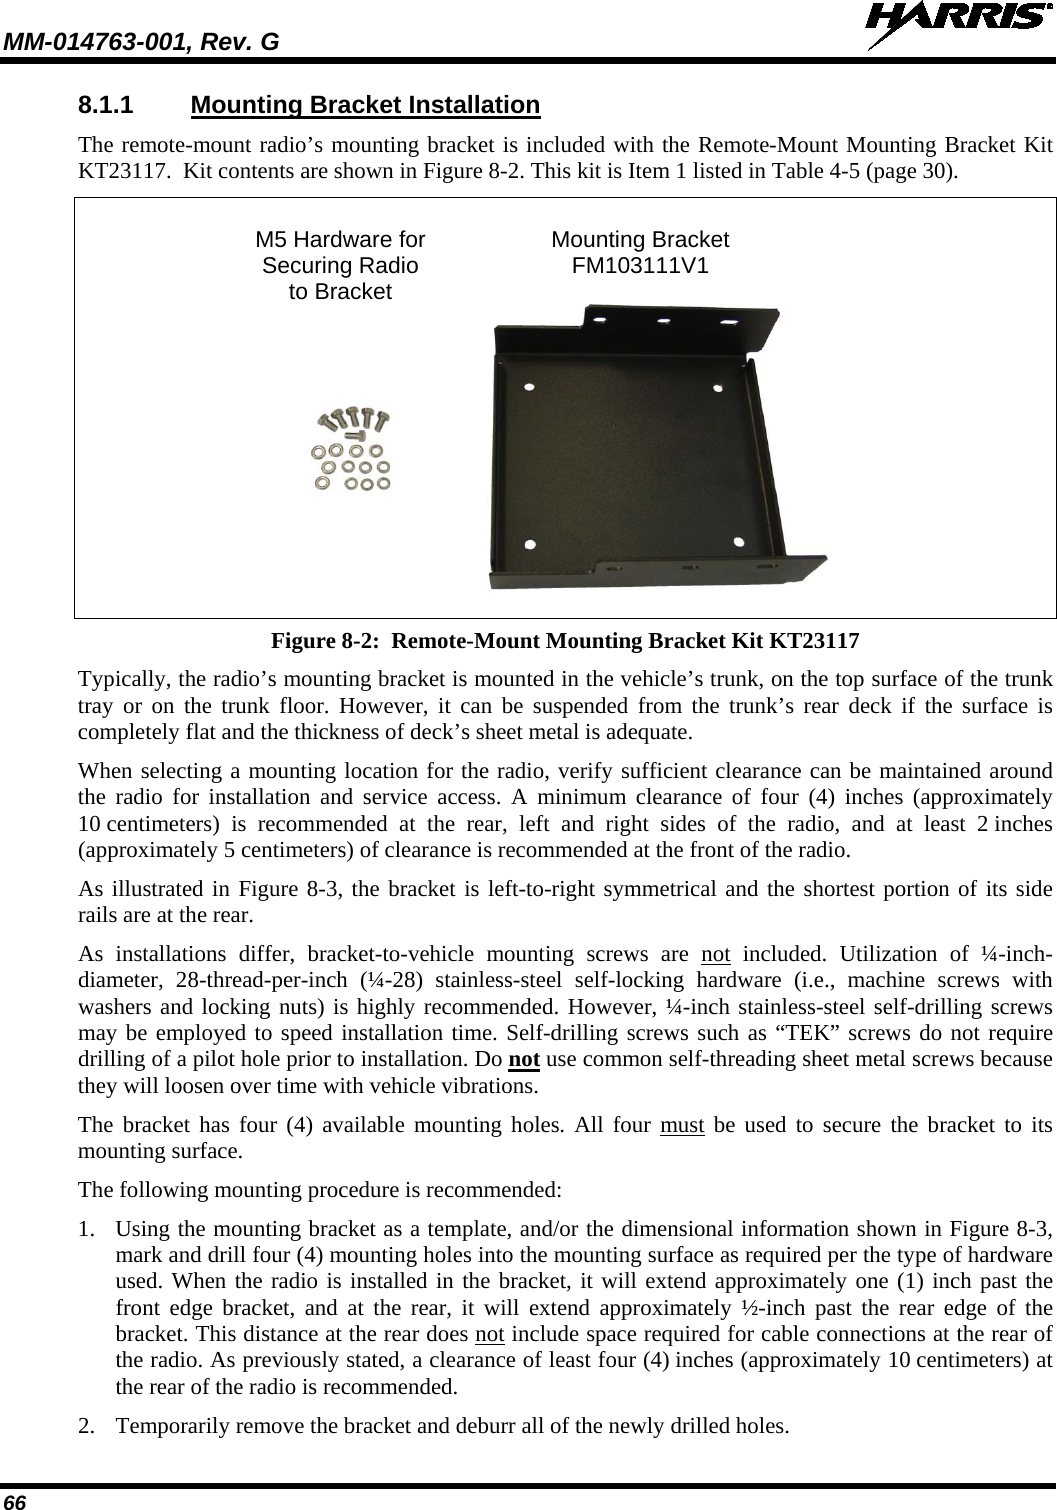 MM-014763-001, Rev. G   66 8.1.1 Mounting Bracket Installation The remote-mount radio’s mounting bracket is included with the Remote-Mount Mounting Bracket Kit KT23117.  Kit contents are shown in Figure 8-2. This kit is Item 1 listed in Table 4-5 (page 30).   M5 Hardware for Mounting Bracket  Securing Radio FM103111V1  to Bracket     Figure 8-2:  Remote-Mount Mounting Bracket Kit KT23117 Typically, the radio’s mounting bracket is mounted in the vehicle’s trunk, on the top surface of the trunk tray or on  the trunk floor. However, it can be suspended from the trunk’s rear deck if the surface is completely flat and the thickness of deck’s sheet metal is adequate. When selecting a mounting location for the radio, verify sufficient clearance can be maintained around the radio for installation and service access. A minimum clearance  of  four (4)  inches (approximately 10 centimeters)  is recommended at the rear,  left and right sides of the radio, and at least 2 inches (approximately 5 centimeters) of clearance is recommended at the front of the radio. As illustrated in Figure 8-3, the bracket is left-to-right symmetrical and the shortest portion of its side rails are at the rear. As installations differ, bracket-to-vehicle mounting screws are not included. Utilization of ¼-inch-diameter, 28-thread-per-inch (¼-28) stainless-steel self-locking hardware (i.e., machine screws with washers and locking nuts) is highly recommended. However, ¼-inch stainless-steel self-drilling screws may be employed to speed installation time. Self-drilling screws such as “TEK” screws do not require drilling of a pilot hole prior to installation. Do not use common self-threading sheet metal screws because they will loosen over time with vehicle vibrations. The bracket has four (4) available mounting holes. All four must be used to secure the bracket to its mounting surface. The following mounting procedure is recommended: 1. Using the mounting bracket as a template, and/or the dimensional information shown in Figure 8-3, mark and drill four (4) mounting holes into the mounting surface as required per the type of hardware used. When the radio is installed in the bracket, it will extend approximately one (1) inch past the front edge bracket, and at the rear, it will extend approximately ½-inch past the rear edge of the bracket. This distance at the rear does not include space required for cable connections at the rear of the radio. As previously stated, a clearance of least four (4) inches (approximately 10 centimeters) at the rear of the radio is recommended. 2. Temporarily remove the bracket and deburr all of the newly drilled holes. 